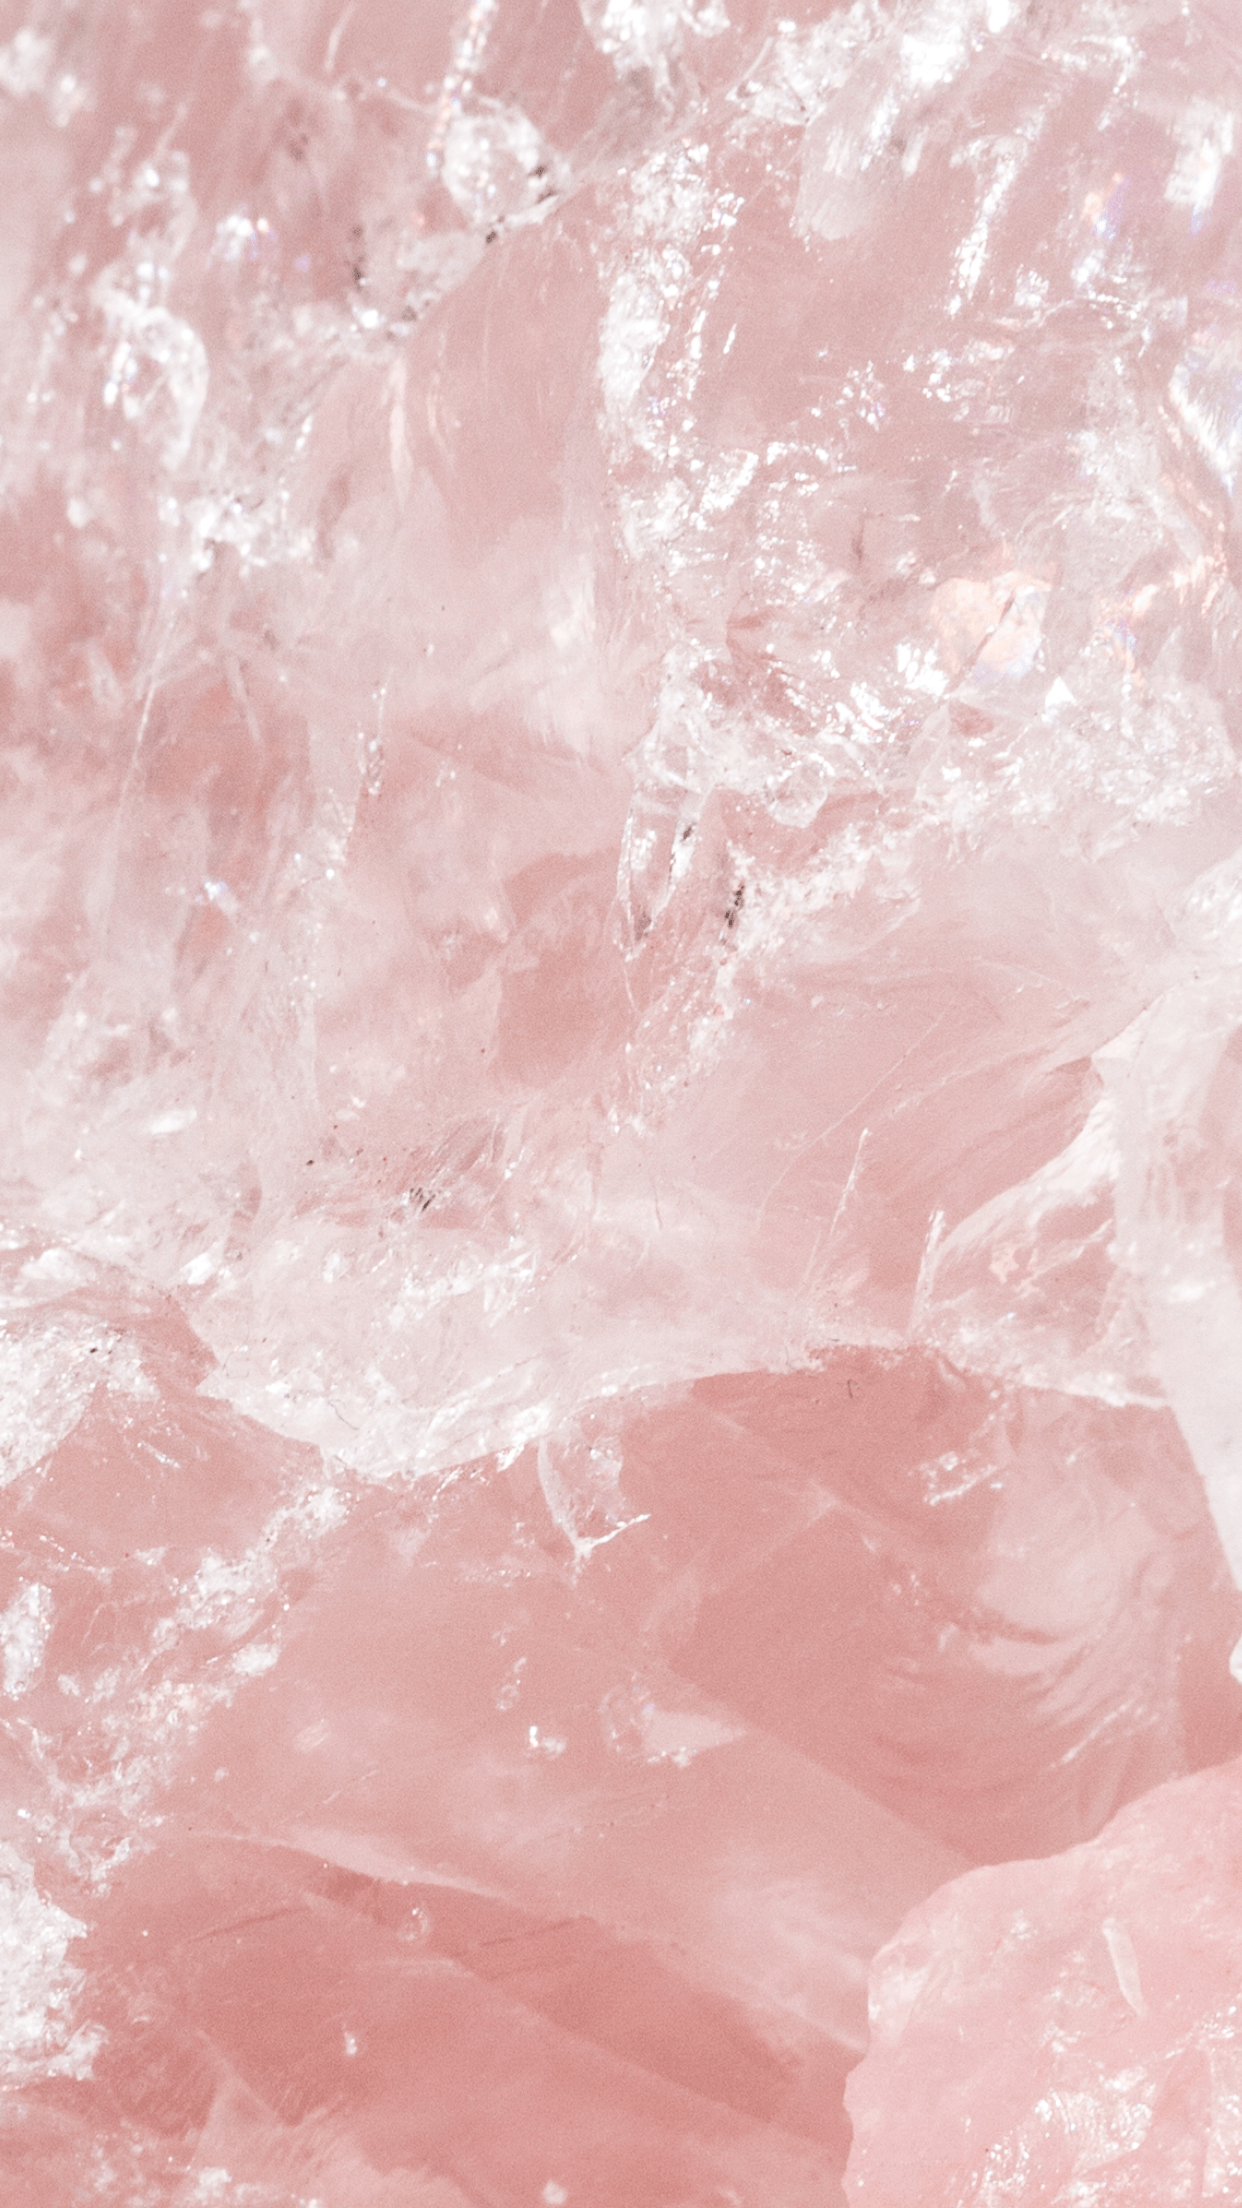 glossier. Pink wallpaper iphone, Textured wallpaper, Marble